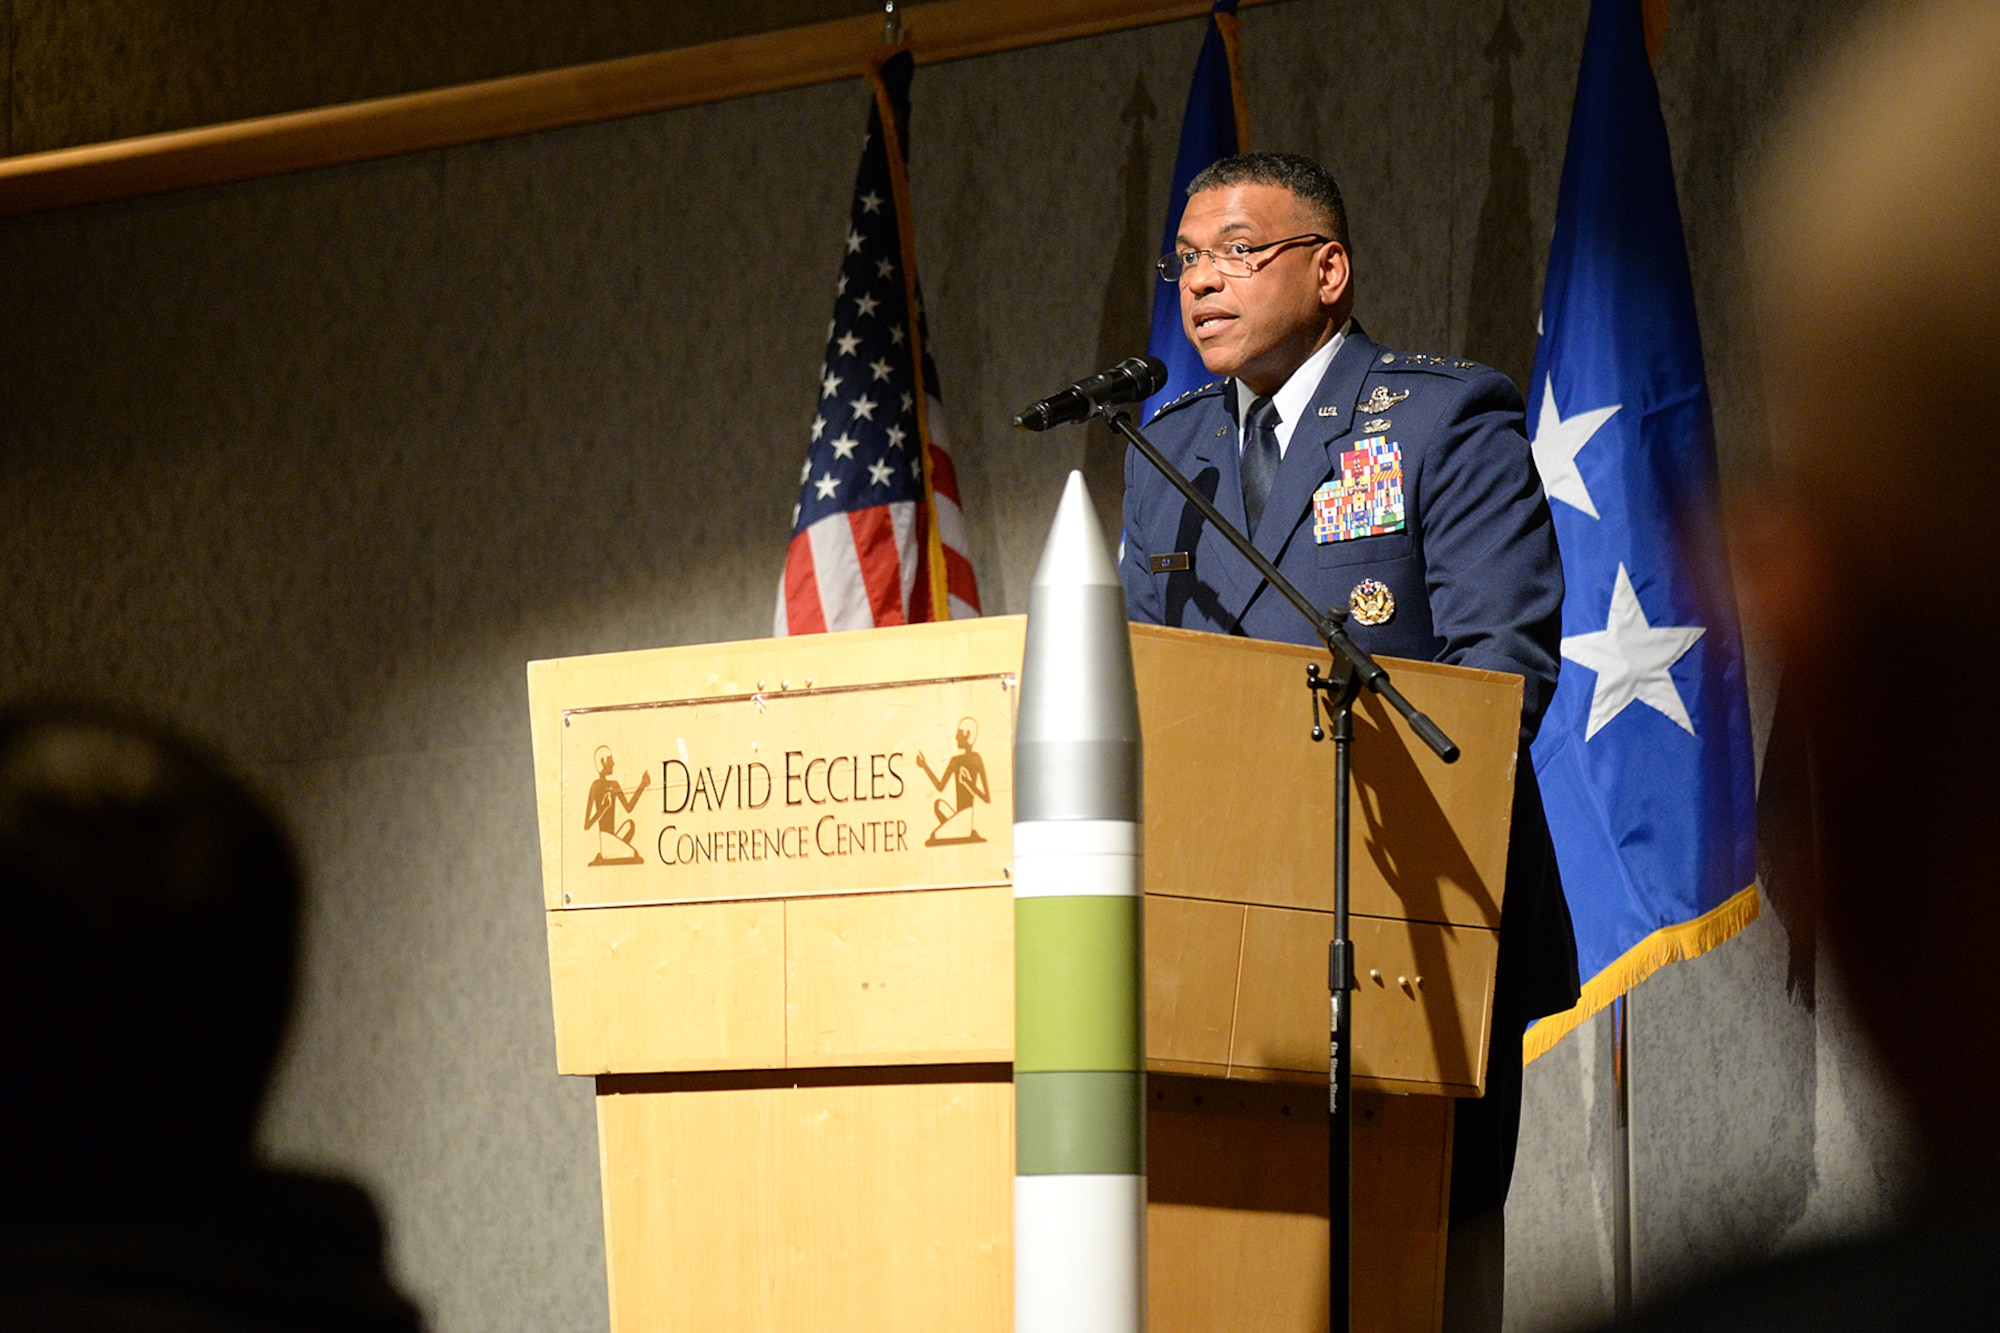 Lieutenant Gen. Richard M. Clark, deputy chief of staff for, Strategic Deterrence and Nuclear Integration, addresses guests at the 30th Annual Air Force Association Brent Scowcroft awards banquet held at the Eccles Conference Center in Ogden, Utah, March 21, 2019. (U.S. Air Force photo by Alex R. Lloyd)